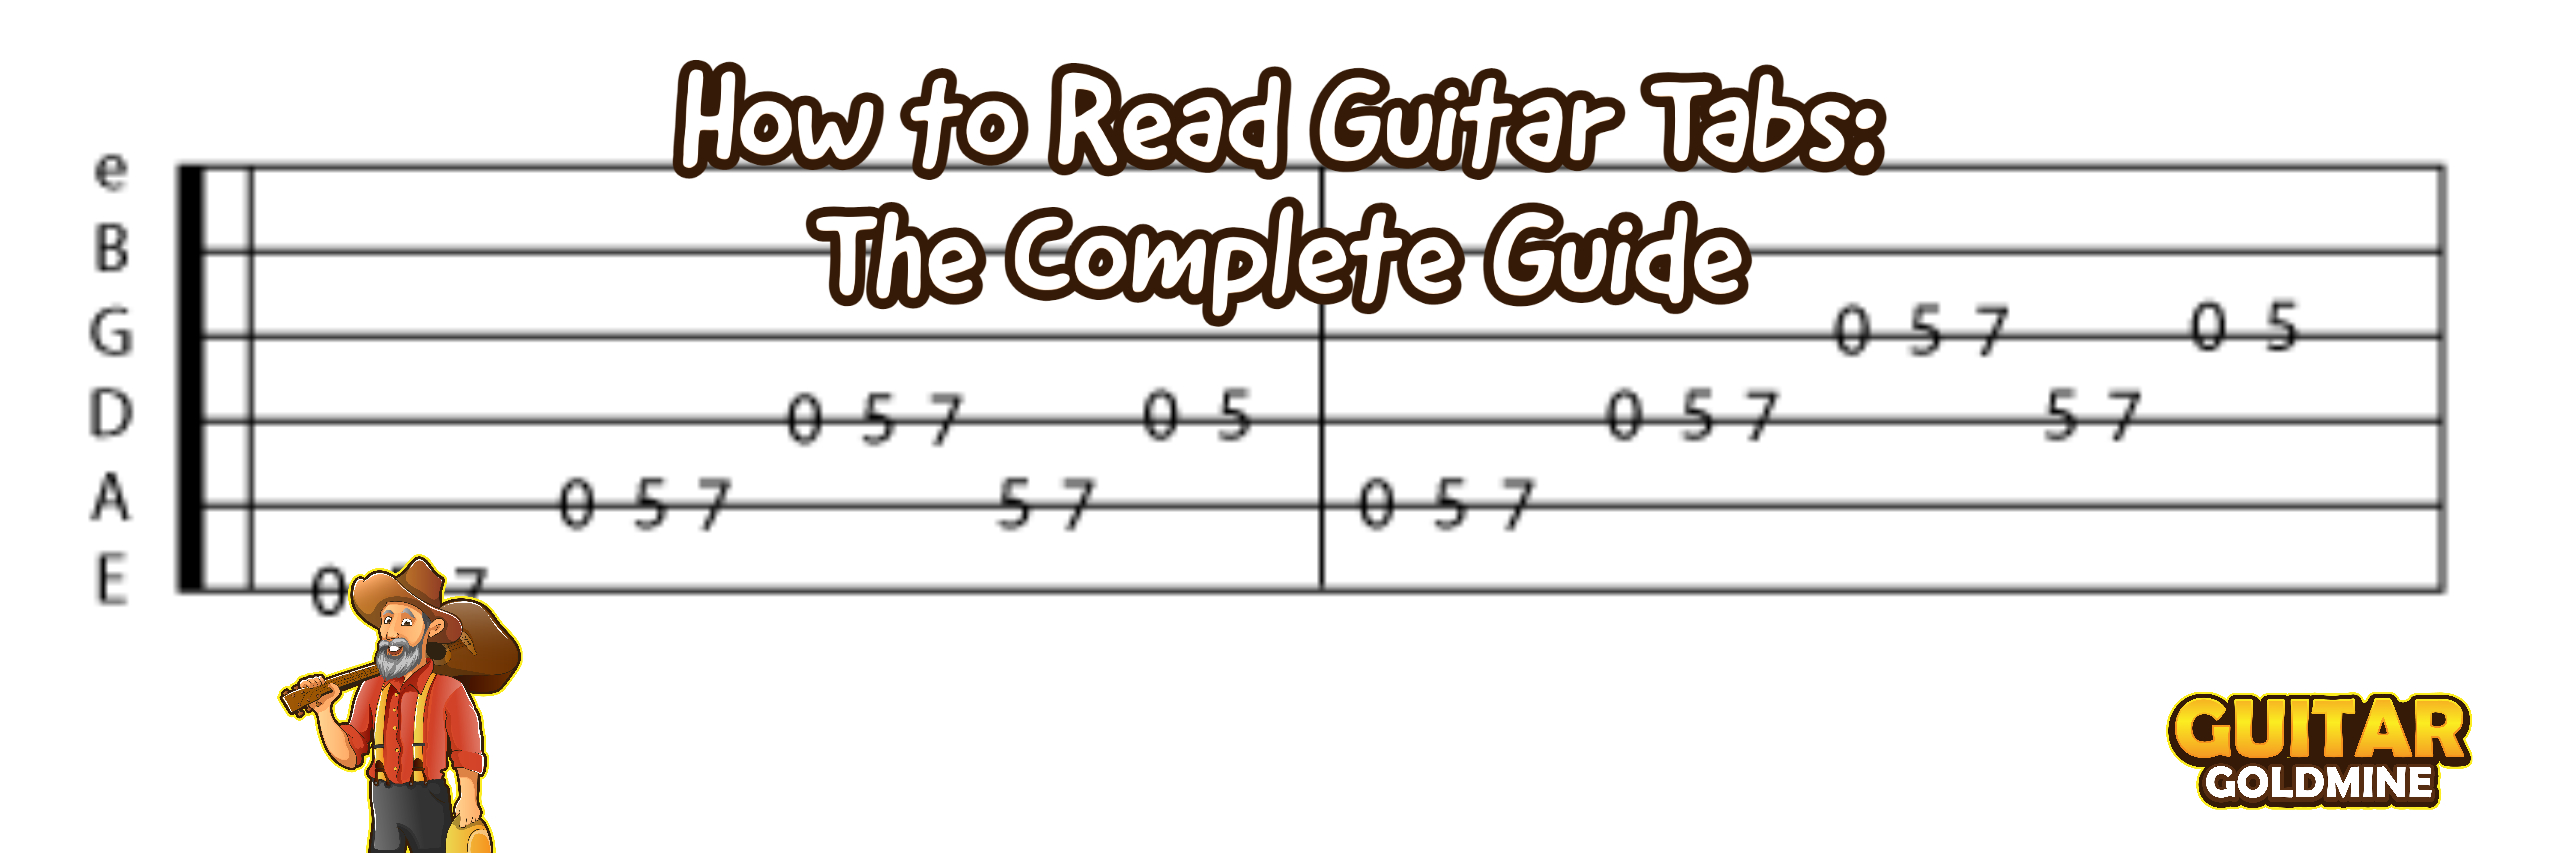 how to read chords for guitar